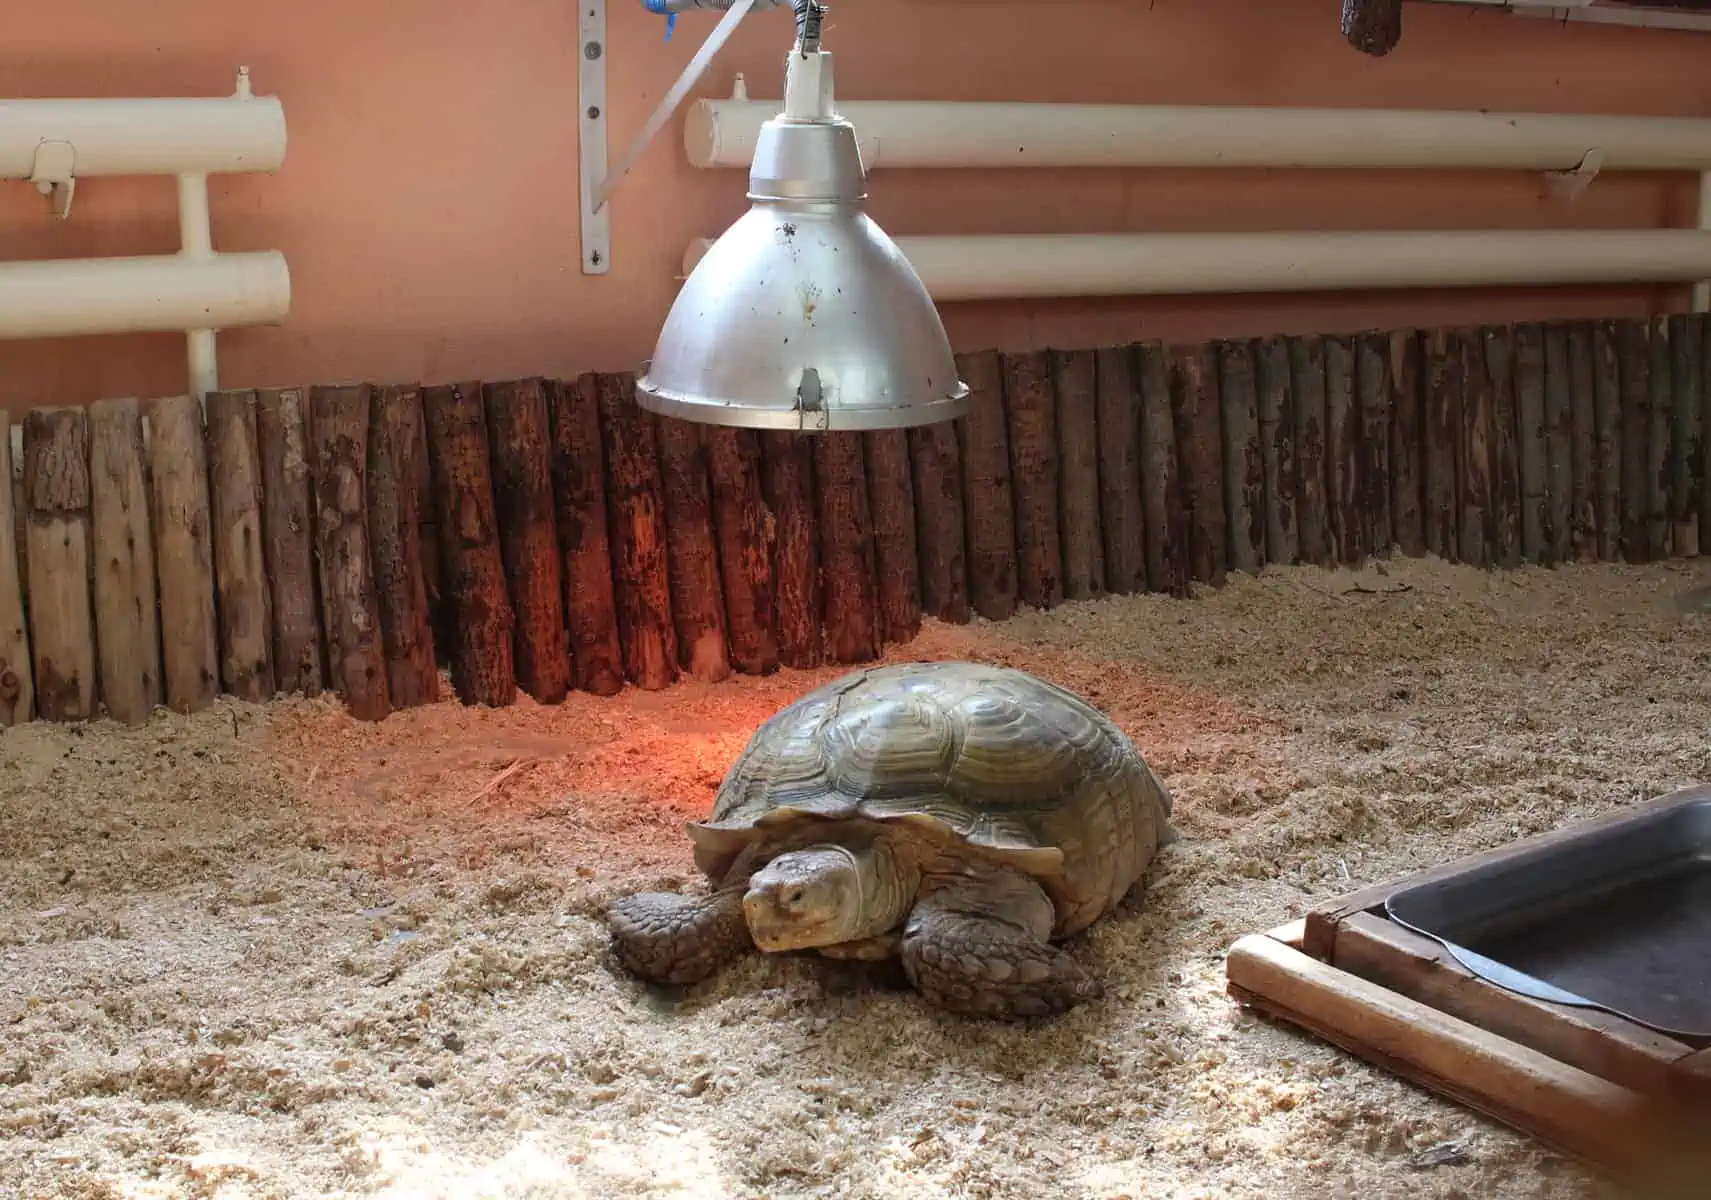 heating lamps for turtles